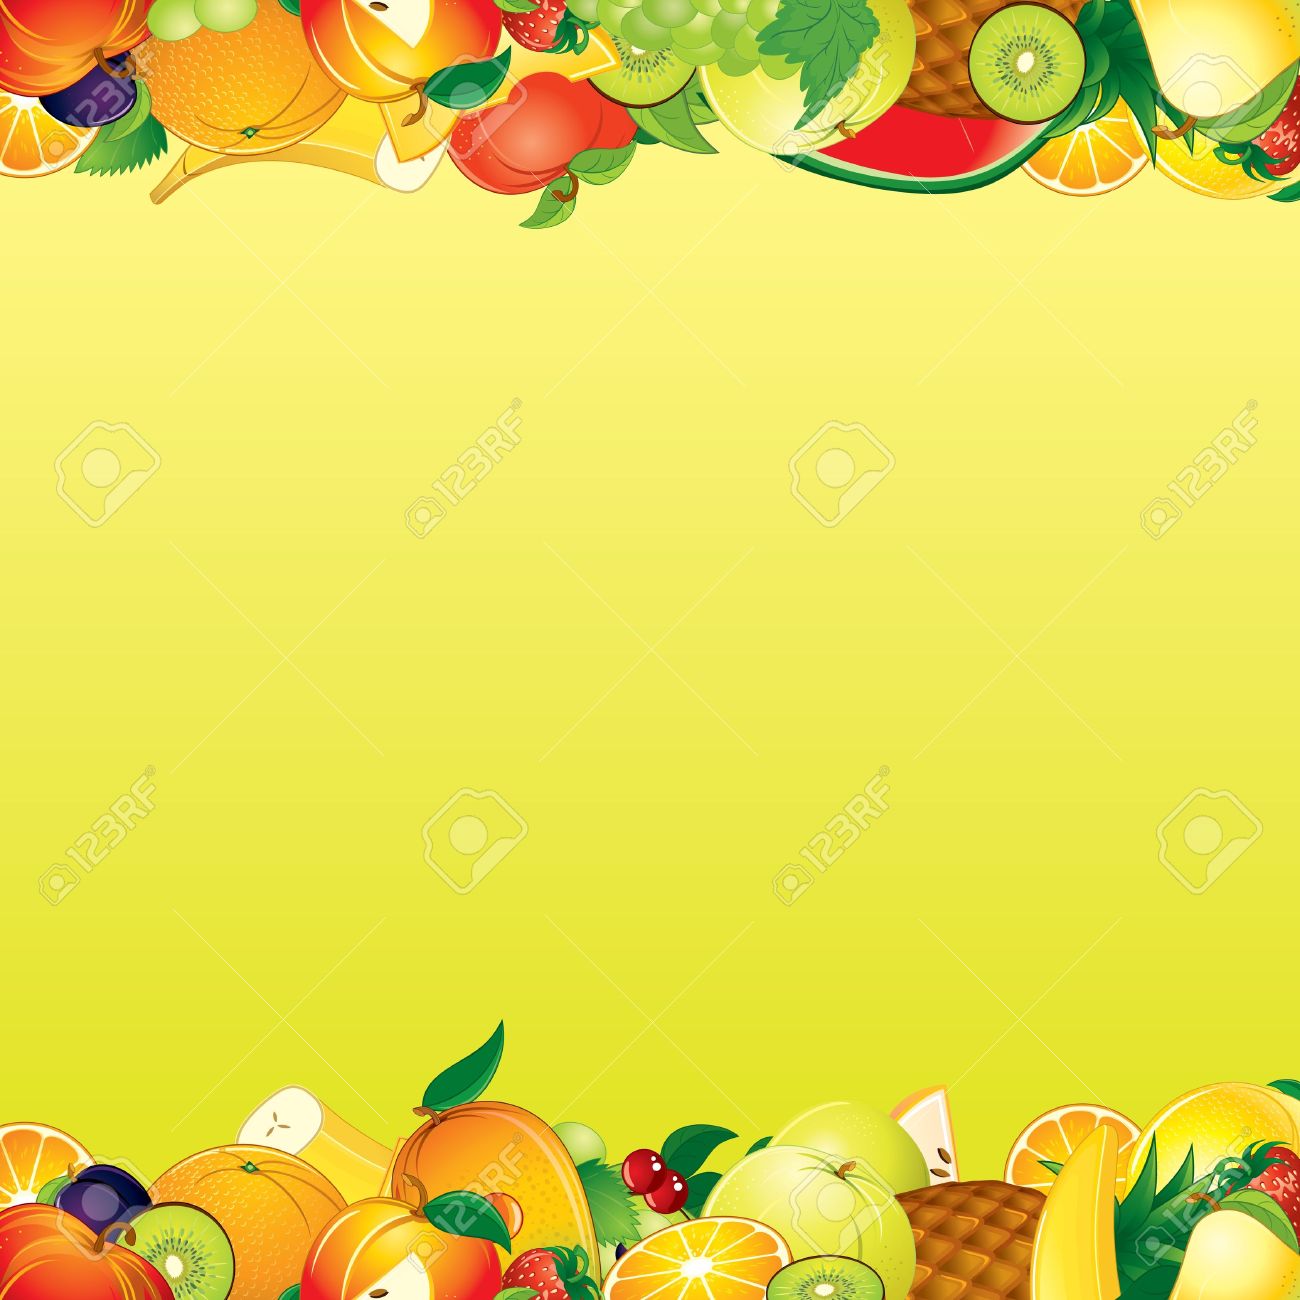 Fruits background clipart 